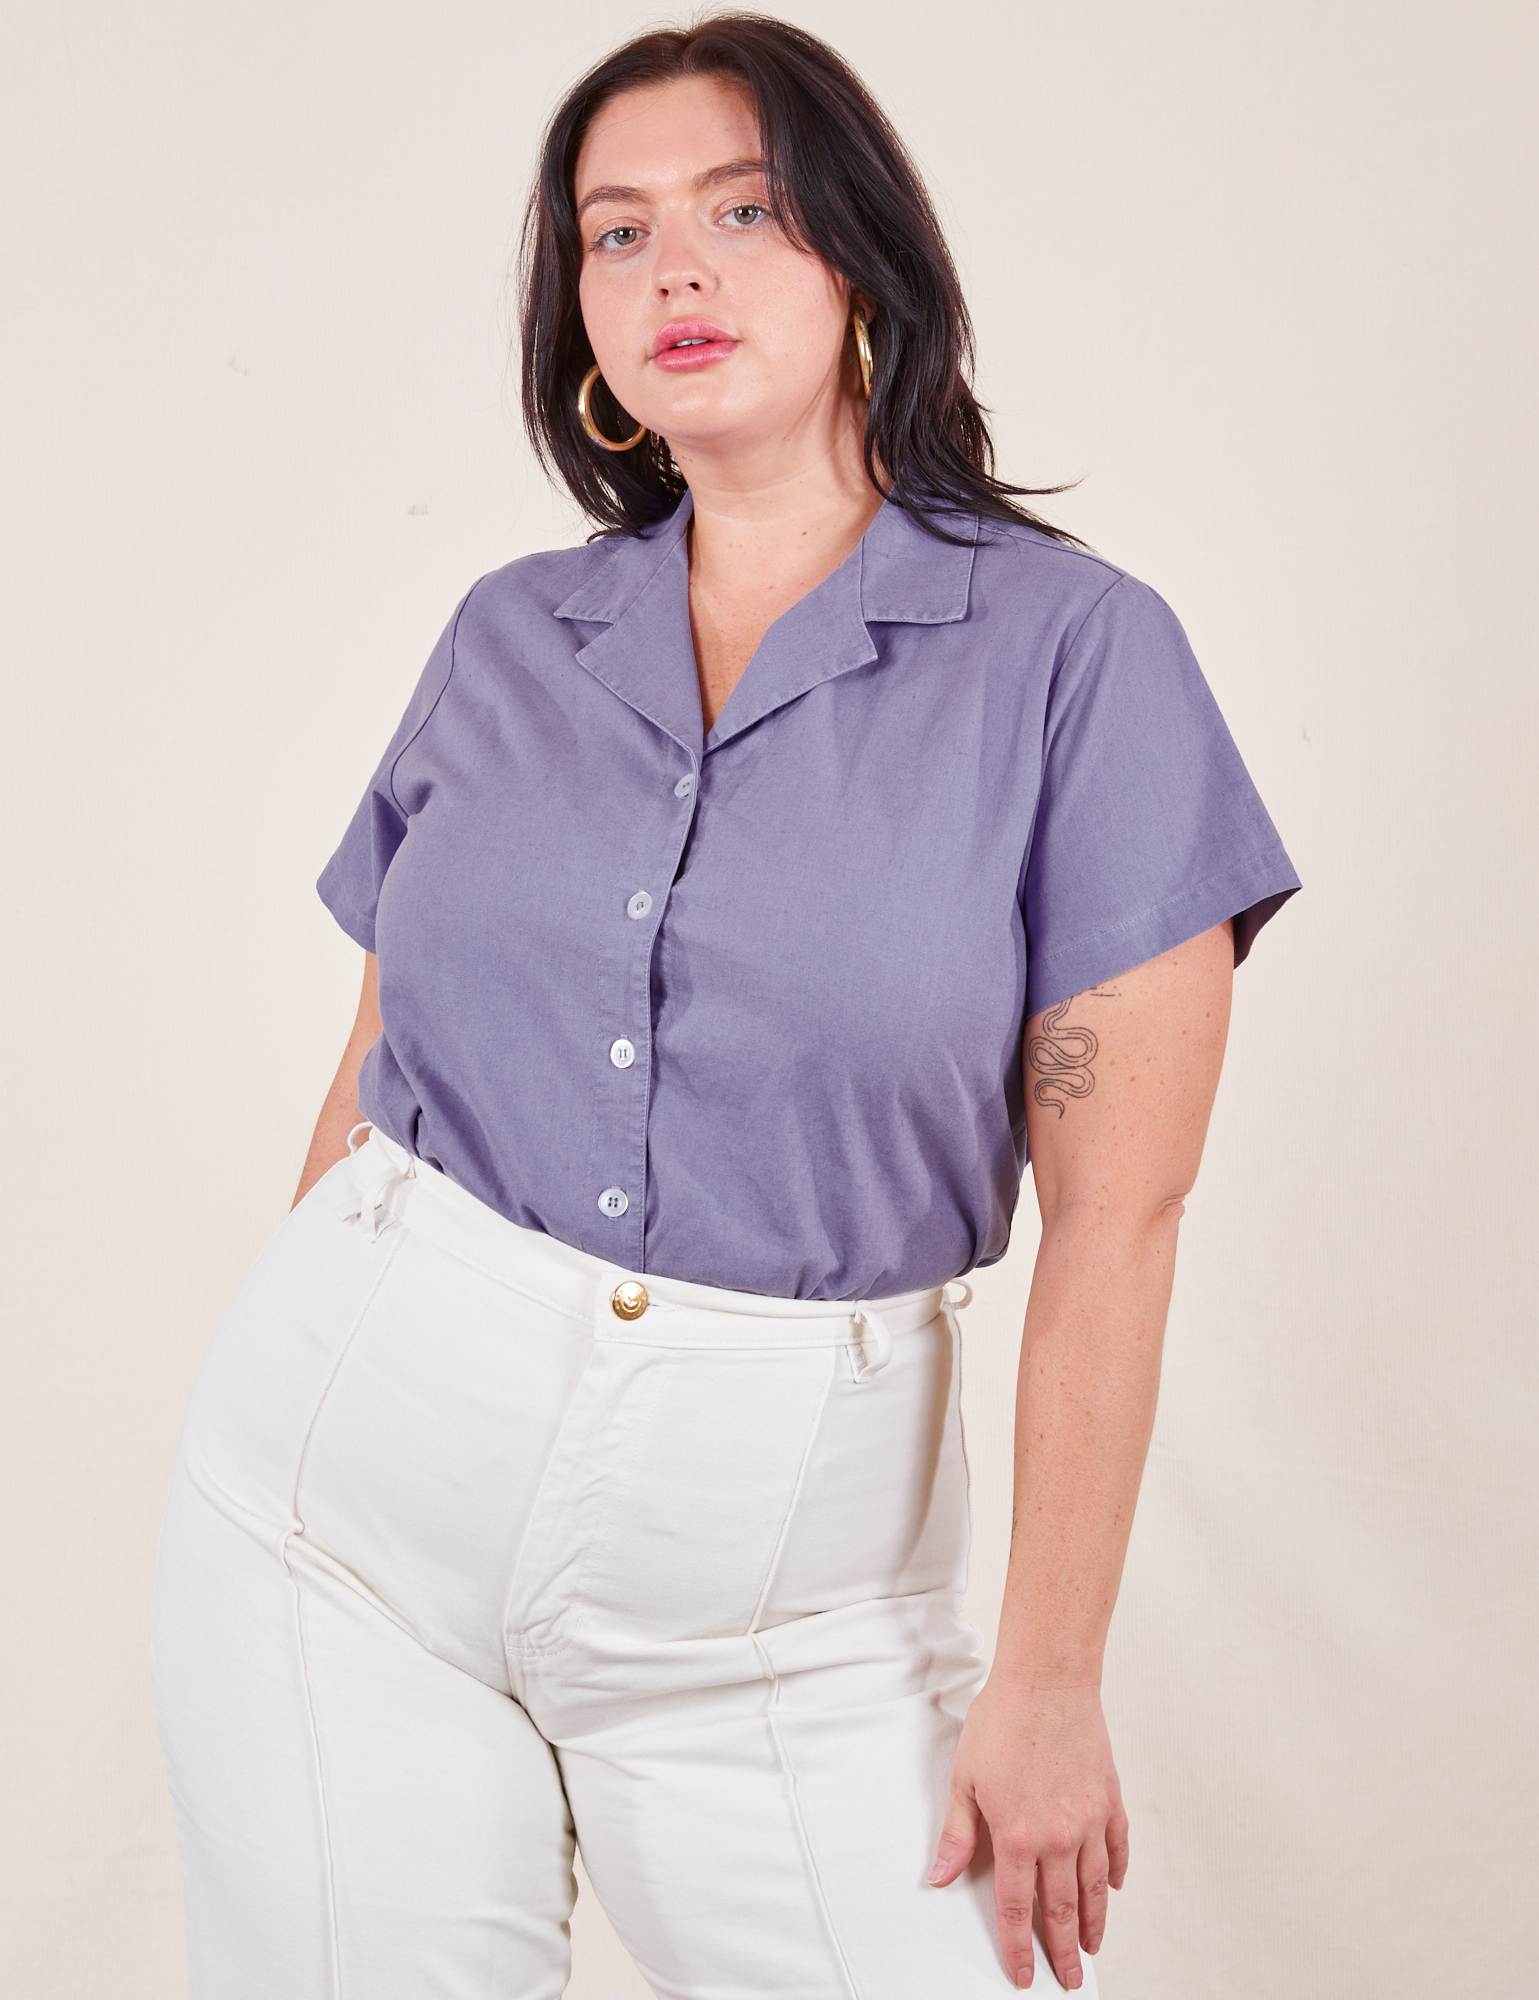 Faye is wearing Pantry Button-Up in Faded Grape tucked into vintage tee off-white Western Pants